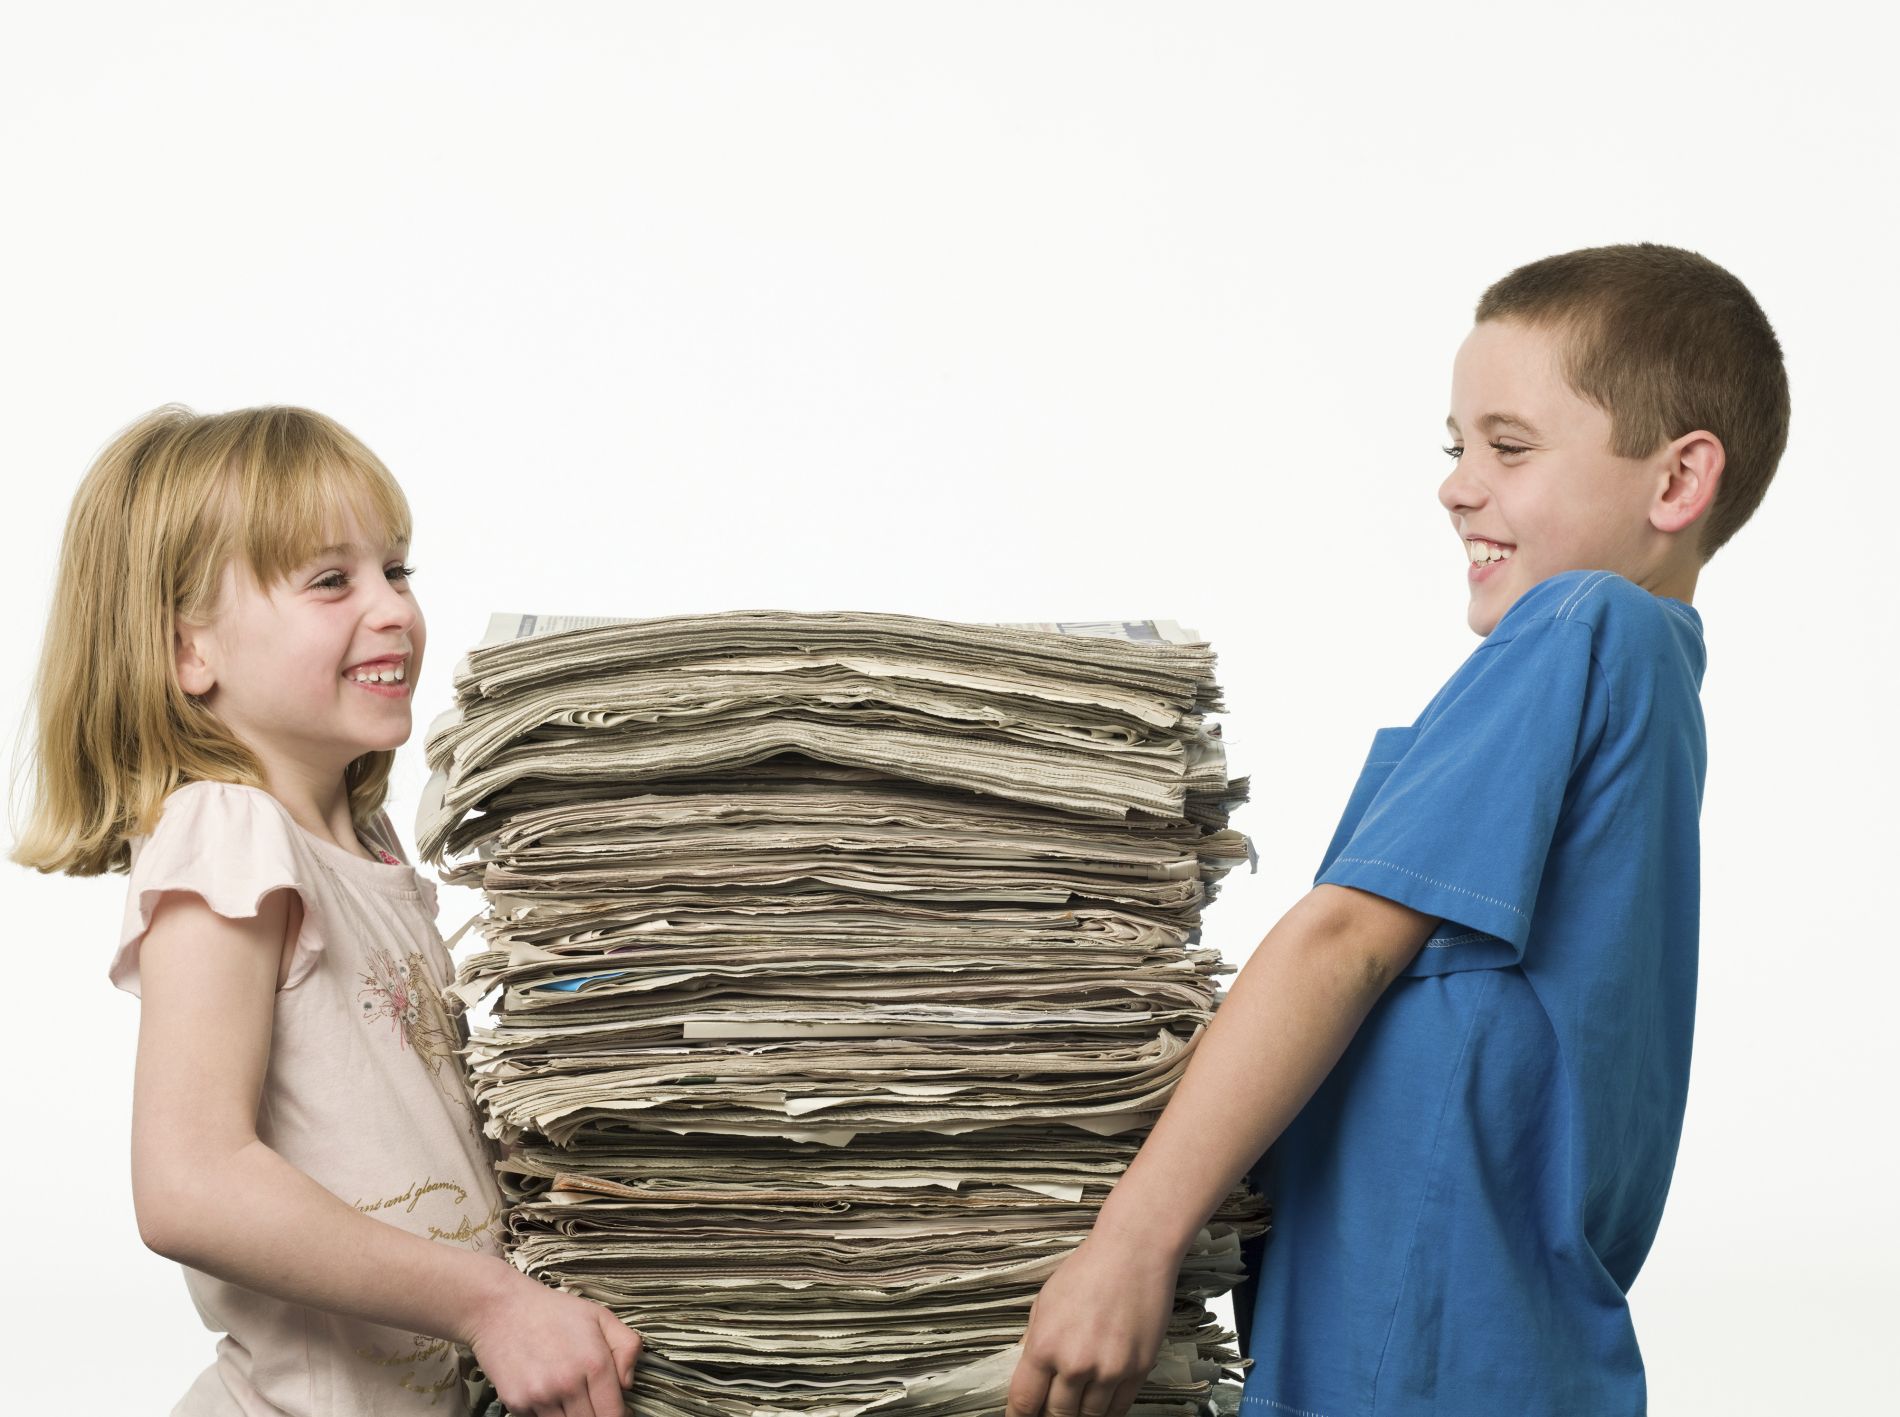 Children carrying Newspapers.